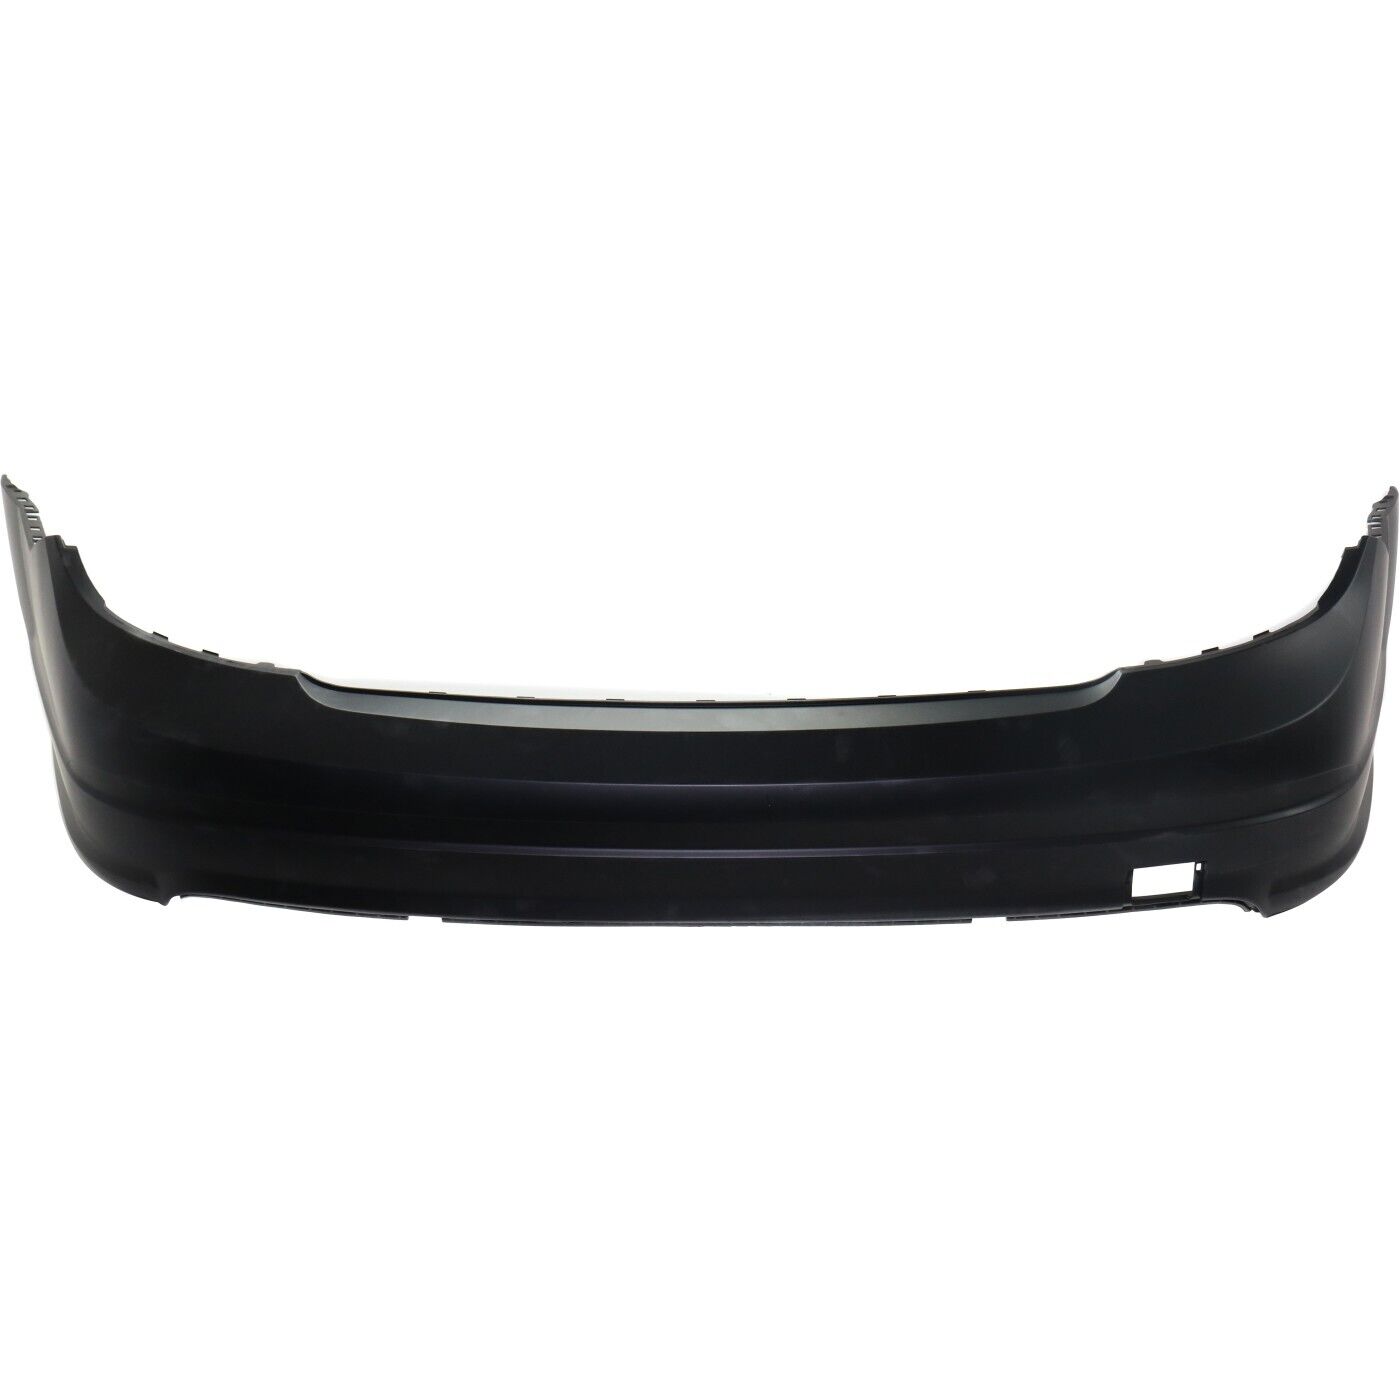 Bumper Cover For 2008-2011 Mercedes Benz C300 with AMG Styling Package Rear